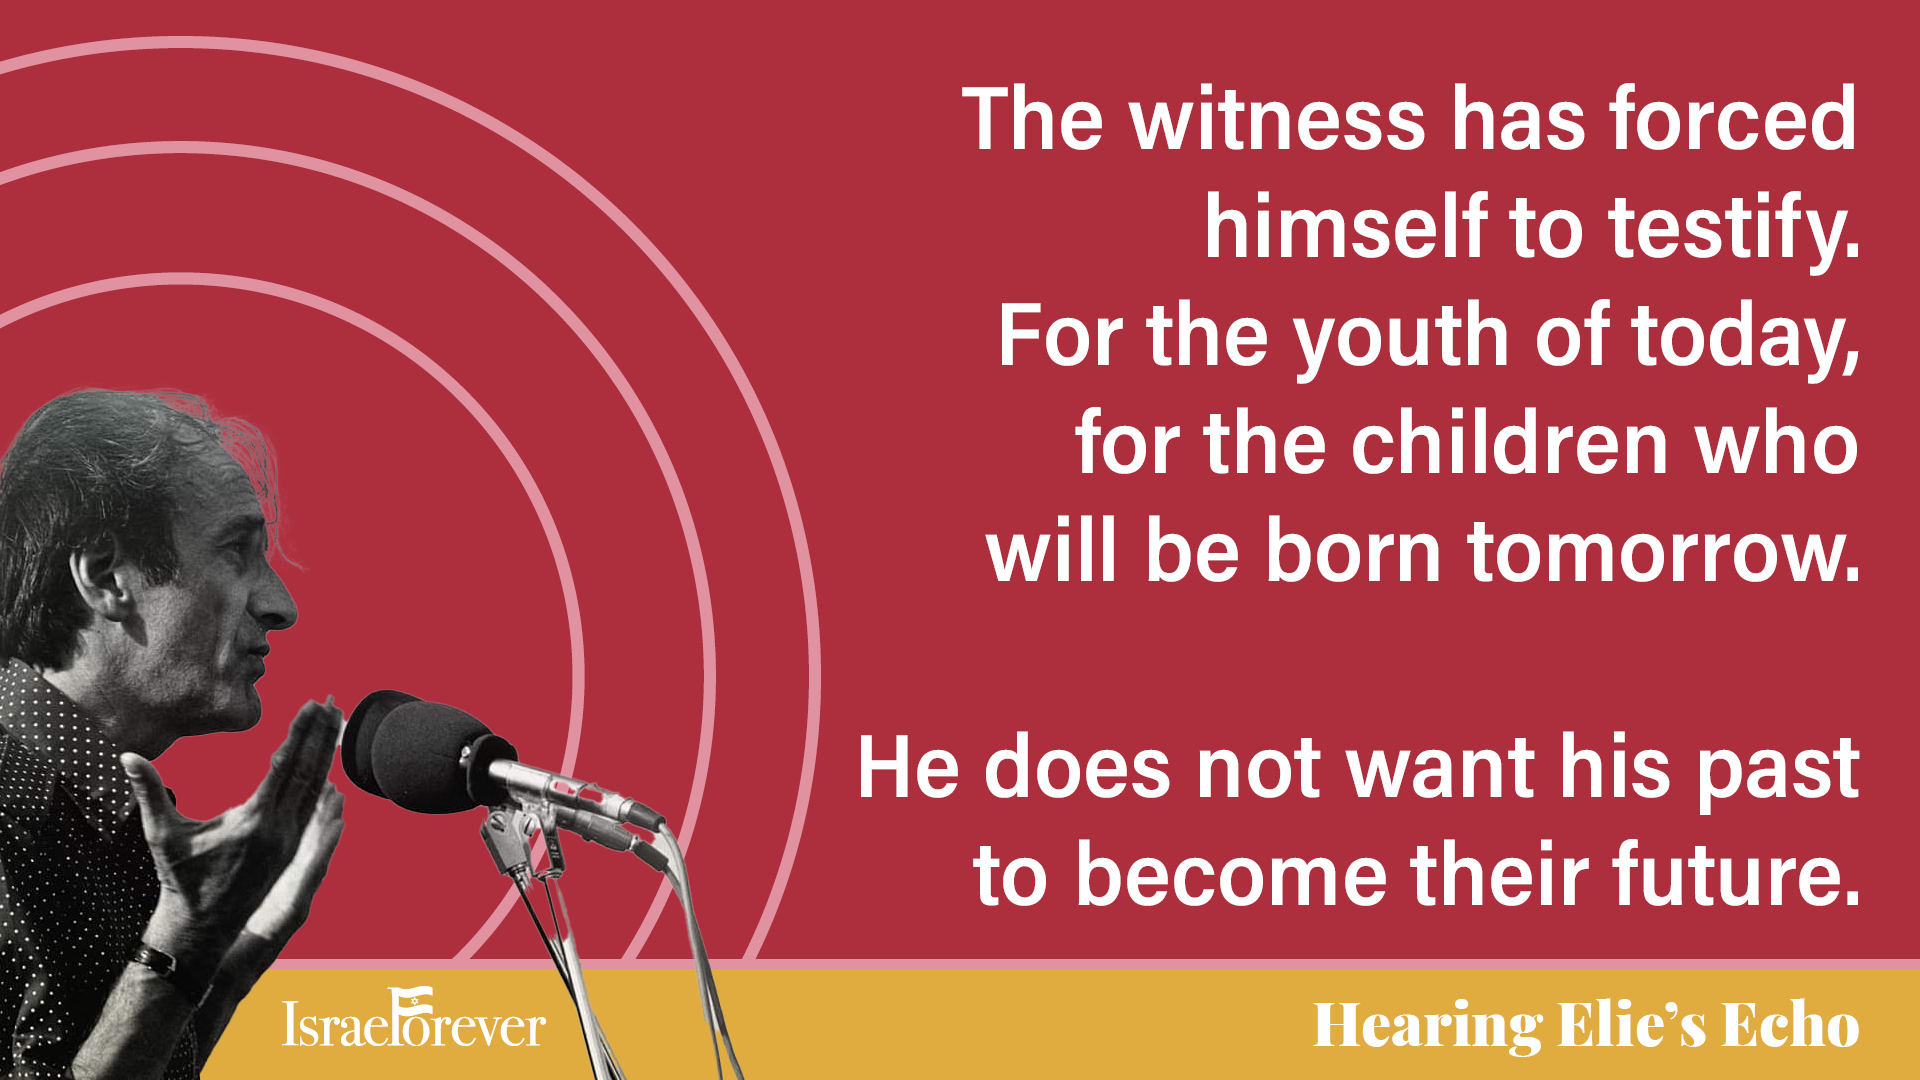 The witness has forced himself to testify - for the youth of today, for the children who will be born tomorrow. He does not want his past to become their future. - Elie Wiesel